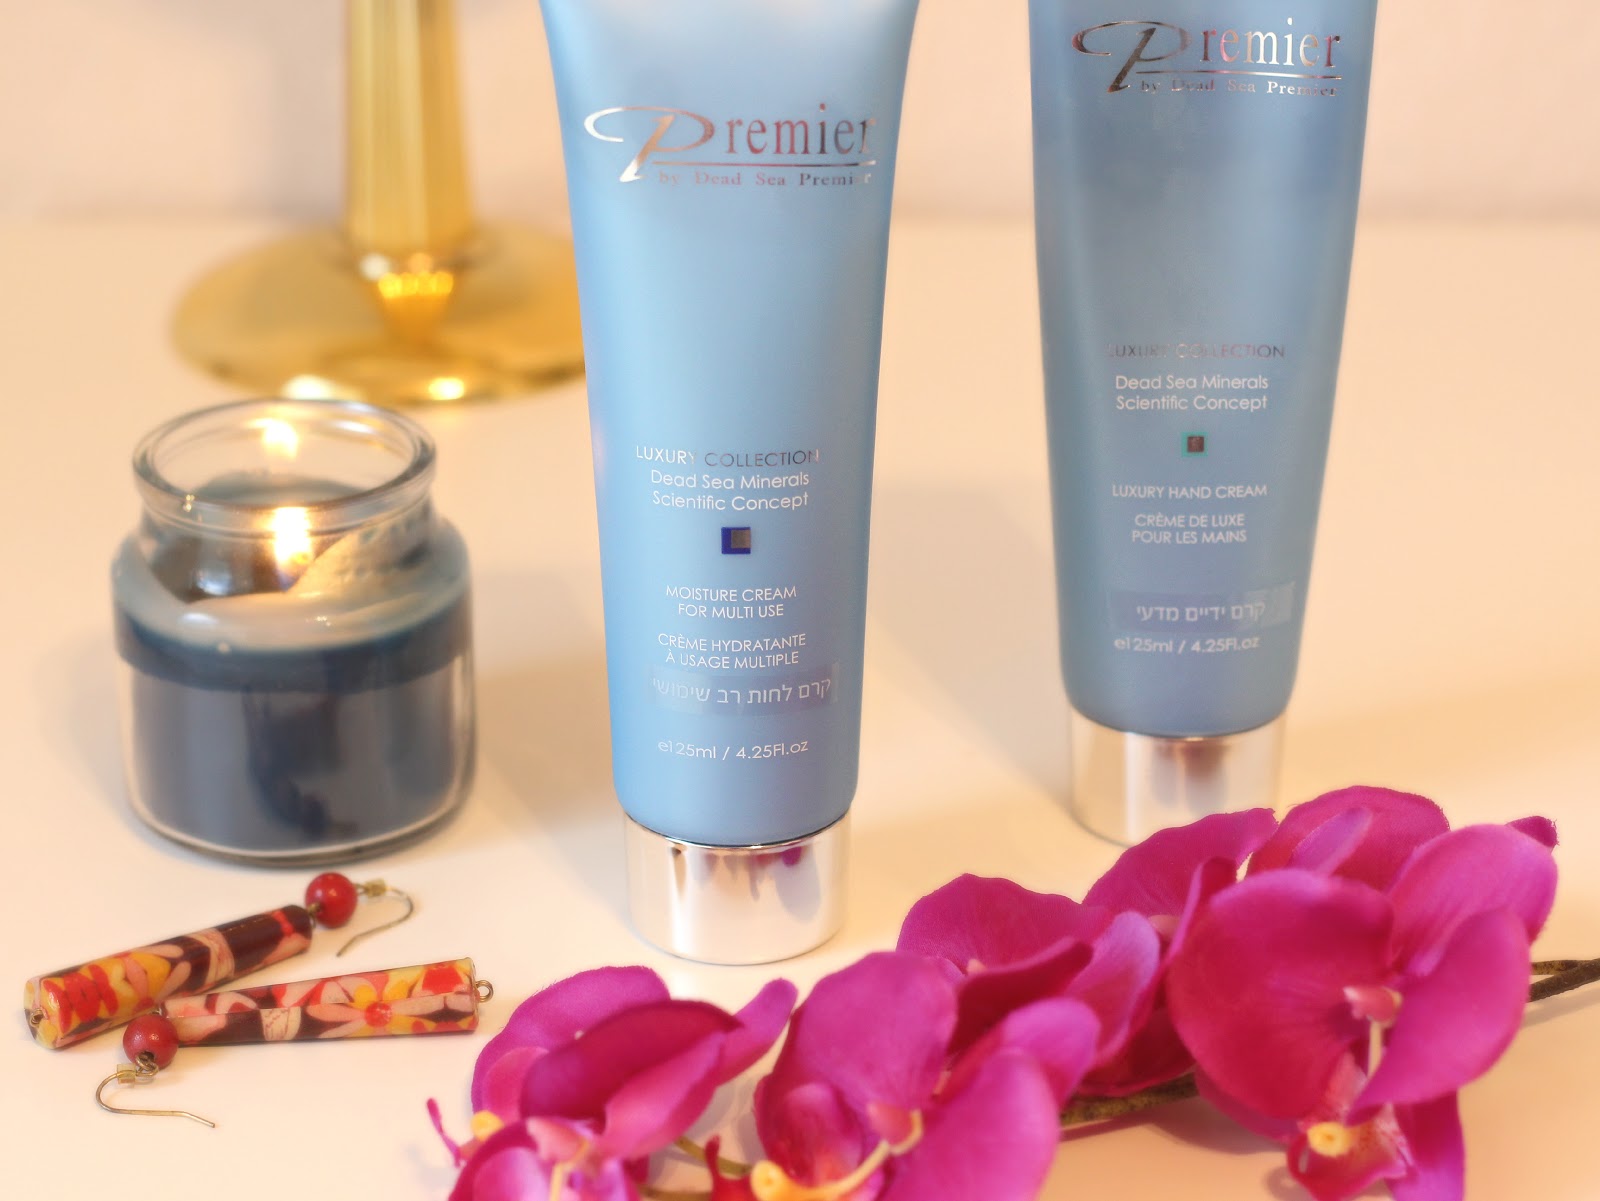 Premier Multi-Use Moisture Cream and Luxury Hand Cream Product Review